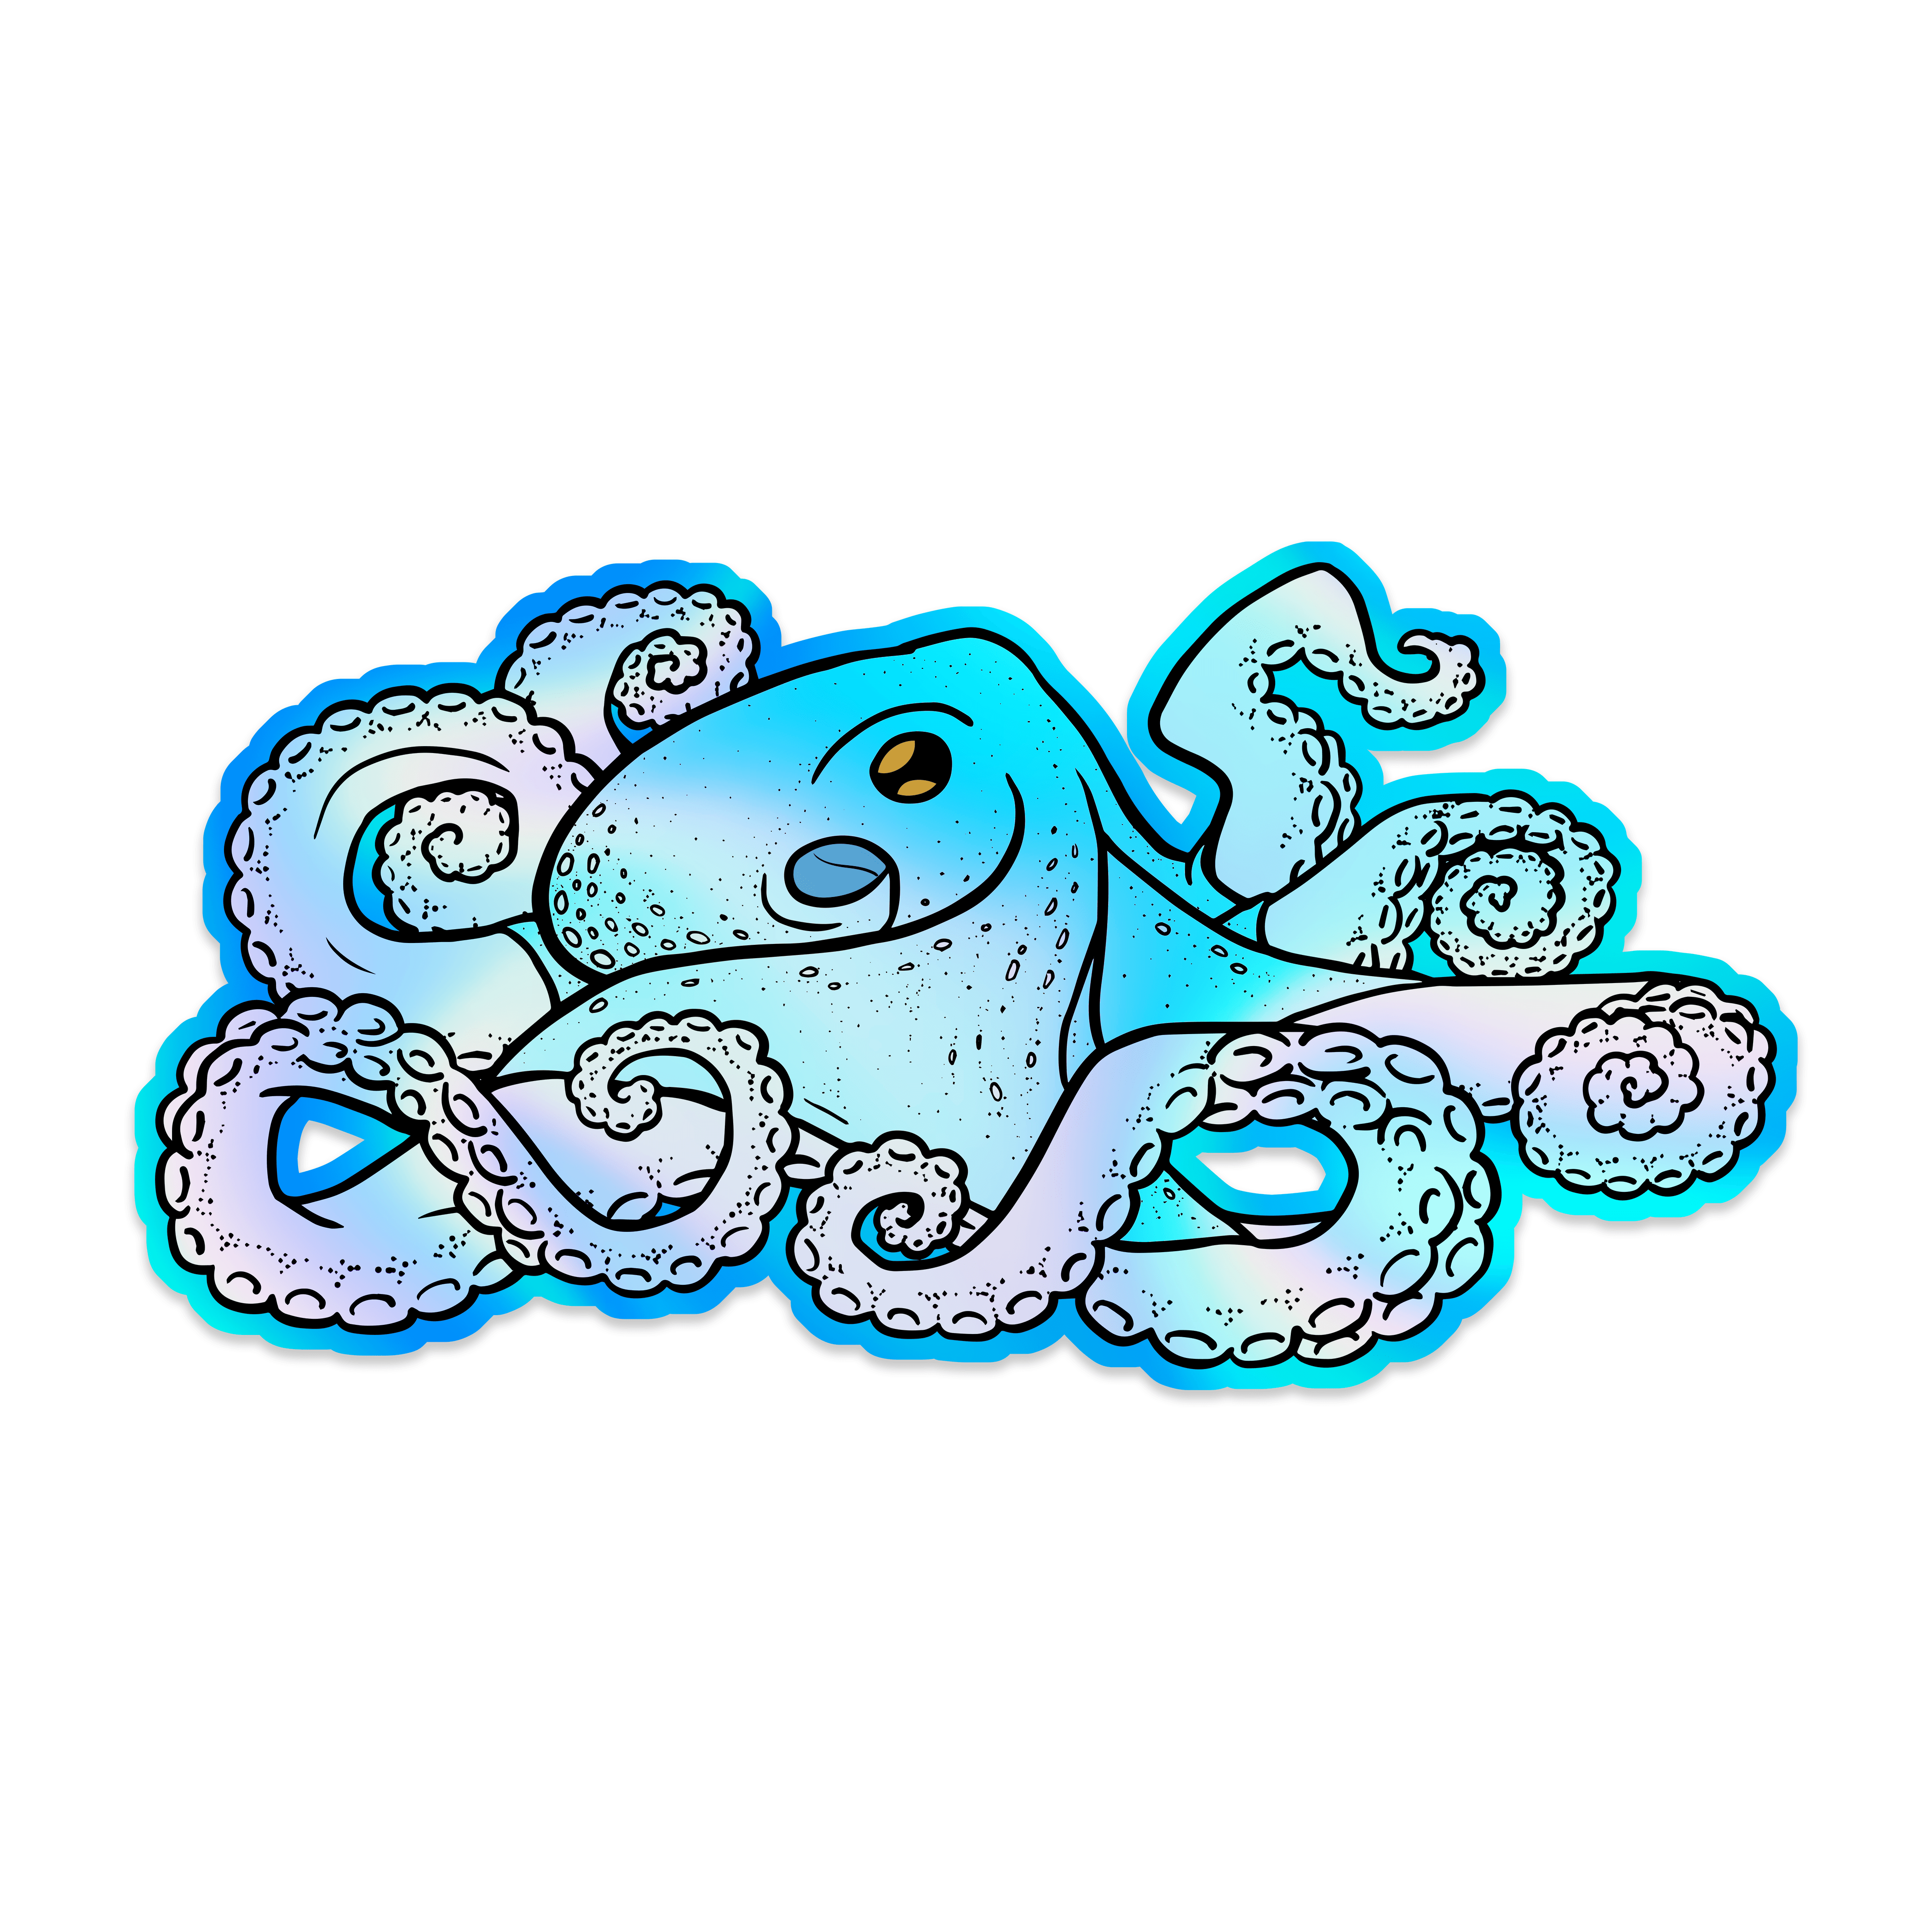 A shiny, rainbow holographic sticker of an octopus with blue skin and golden eyes.